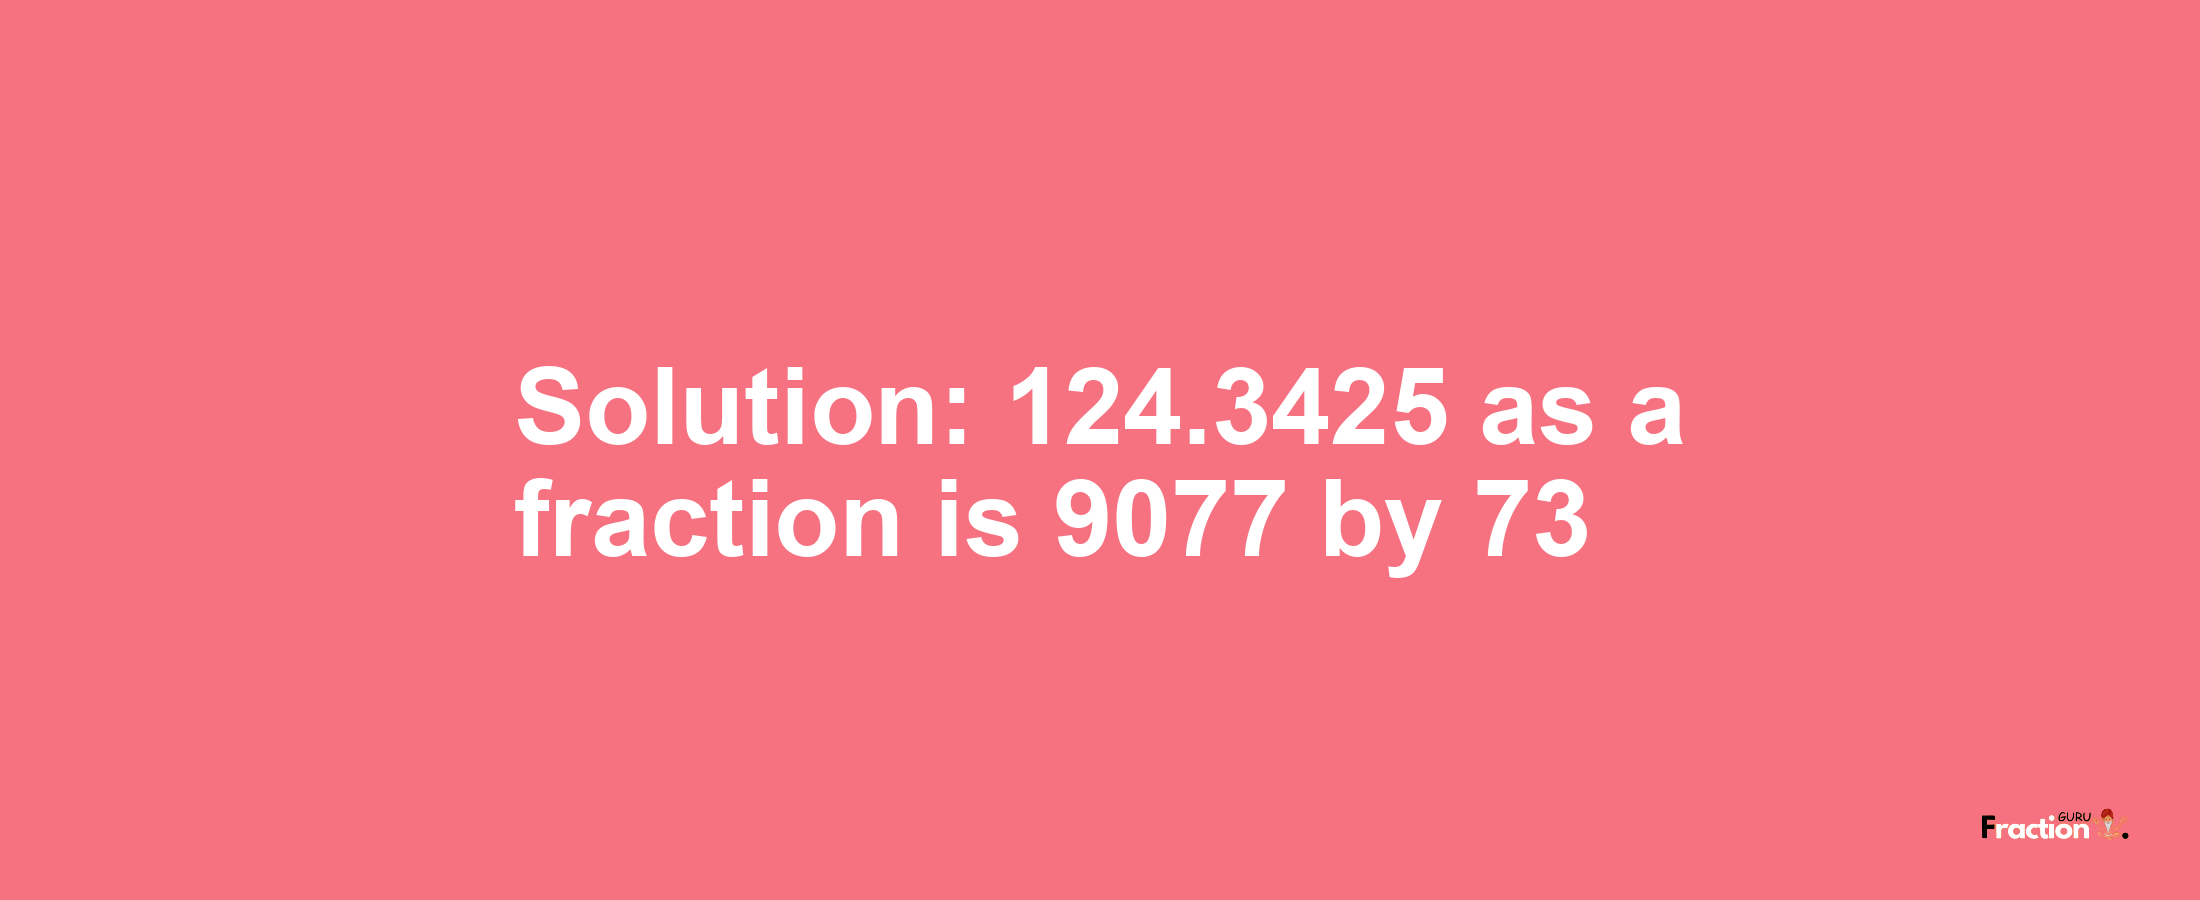 Solution:124.3425 as a fraction is 9077/73